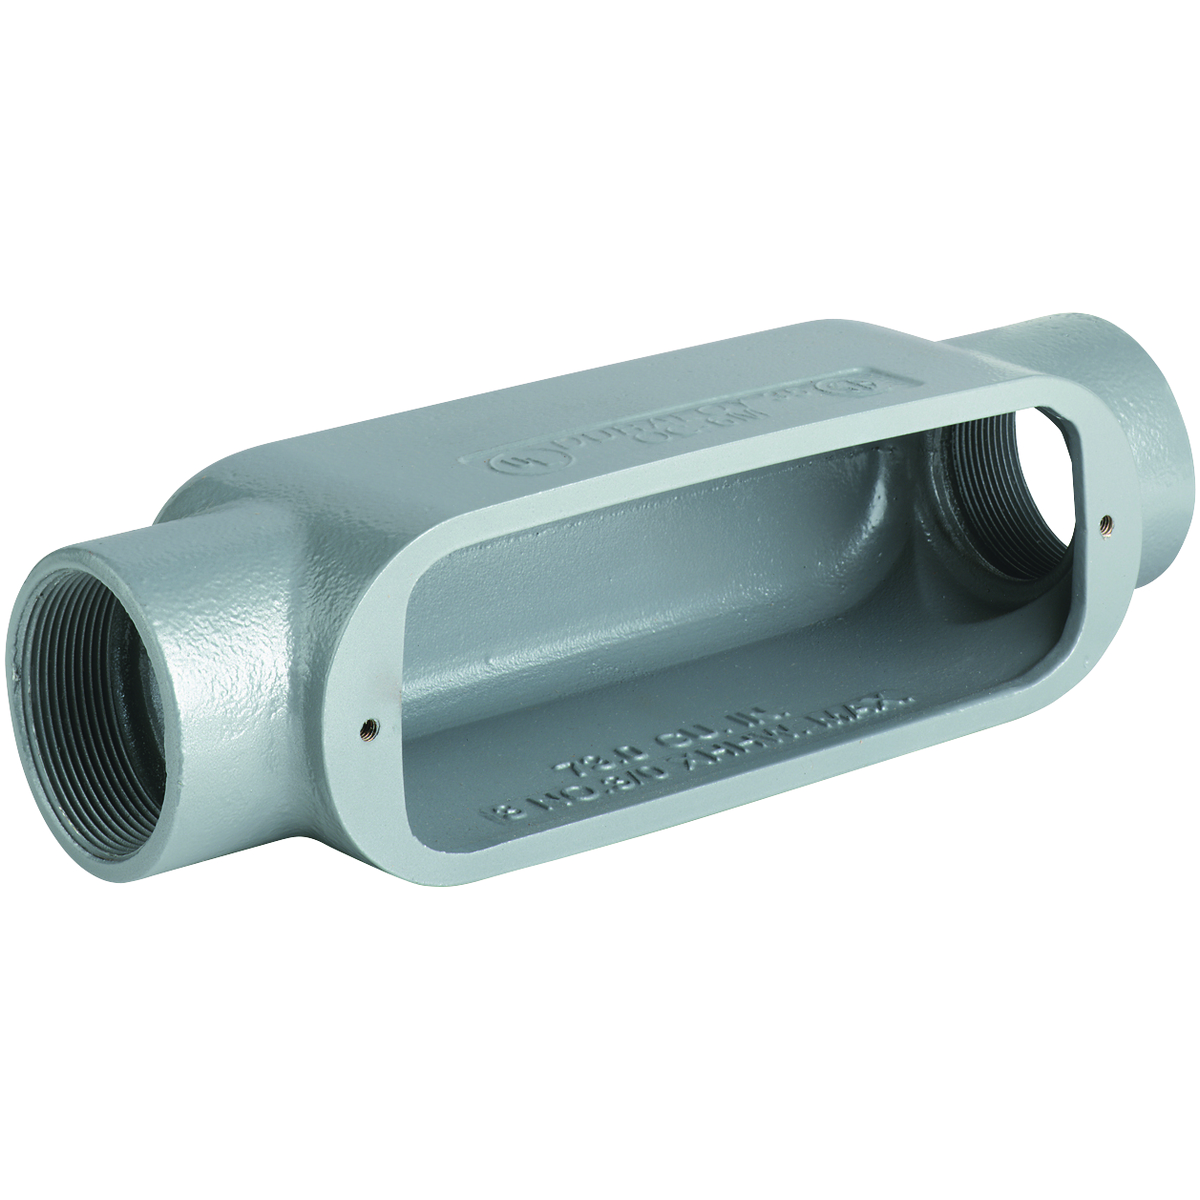 O SERIES/DURALOY 5 SERIES - ALUMINUM CONDUIT BODY - C TYPE - HUB SIZE2-1/2 INCH - VOLUME 153.0 CUBIC INCHES